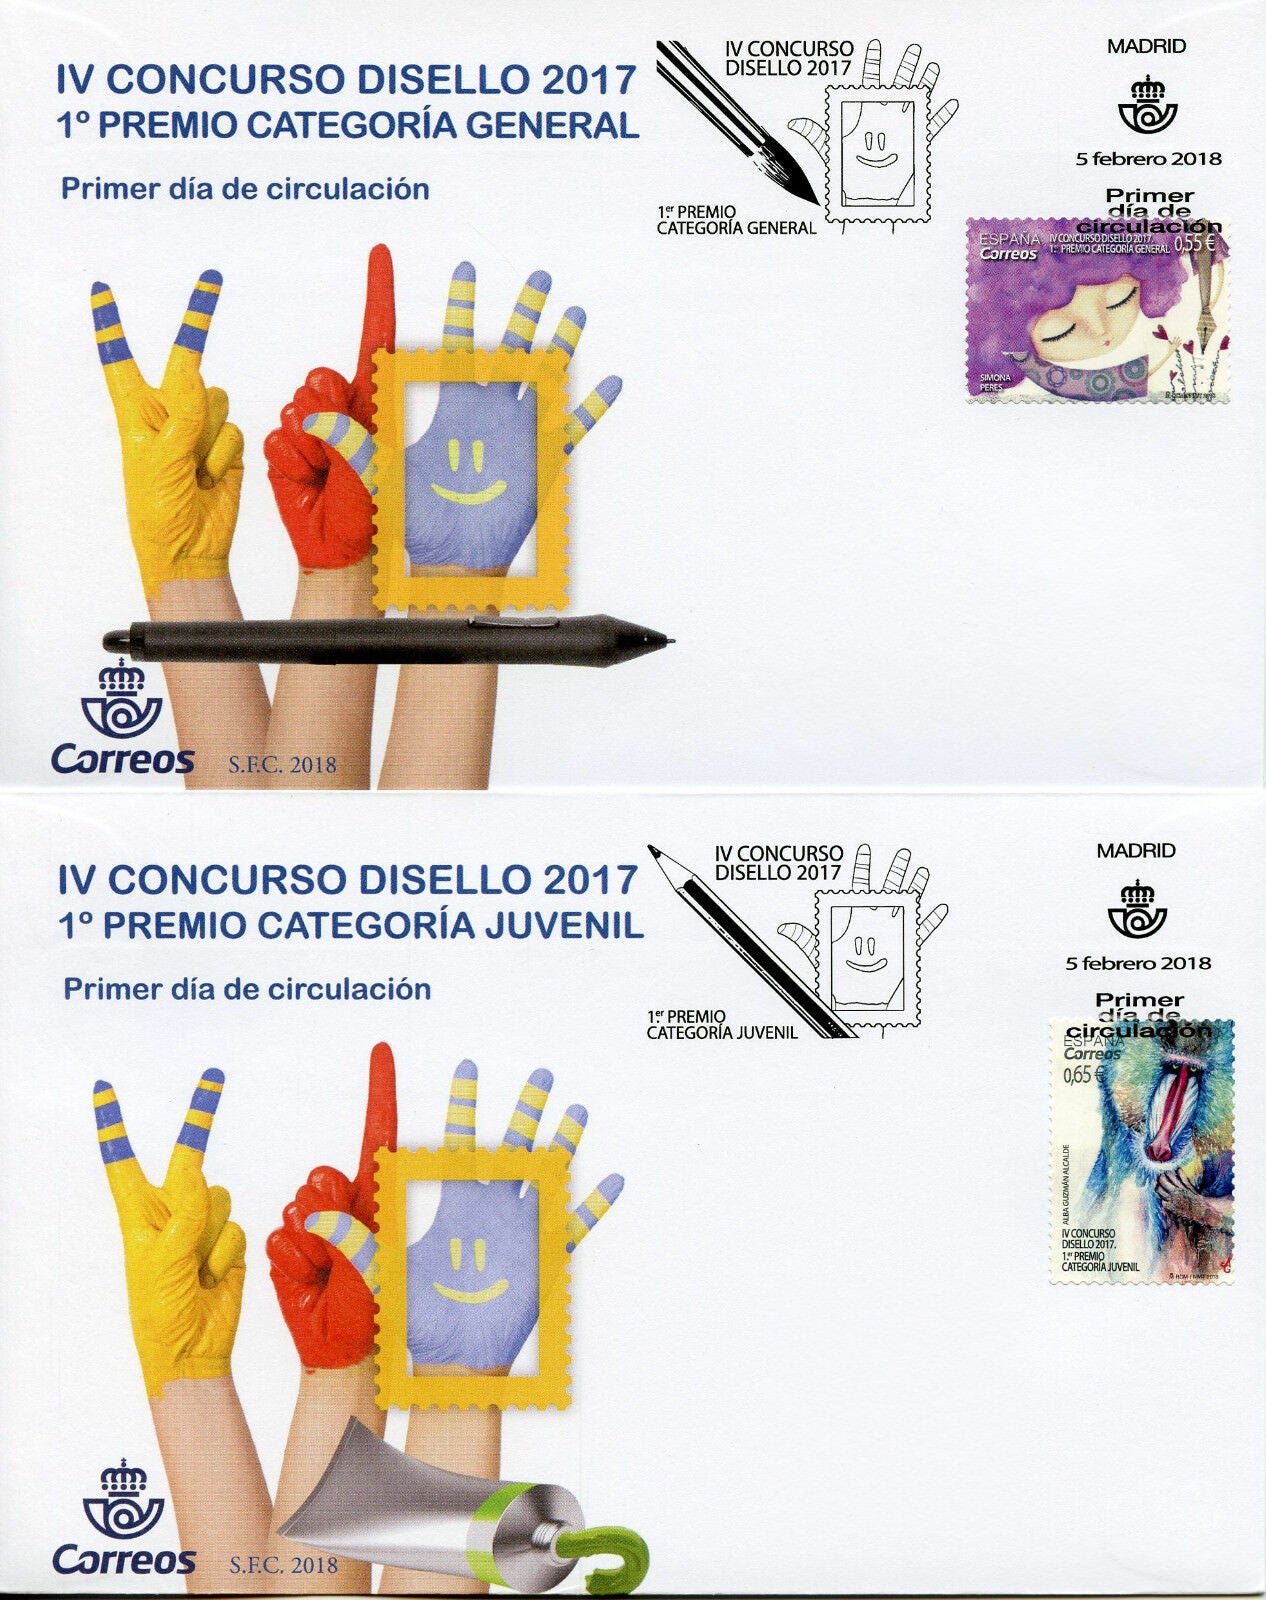 Spain 2018 FDC Disello Stamp Design Contest 2v Set on 2 Covers Monkeys Stamps